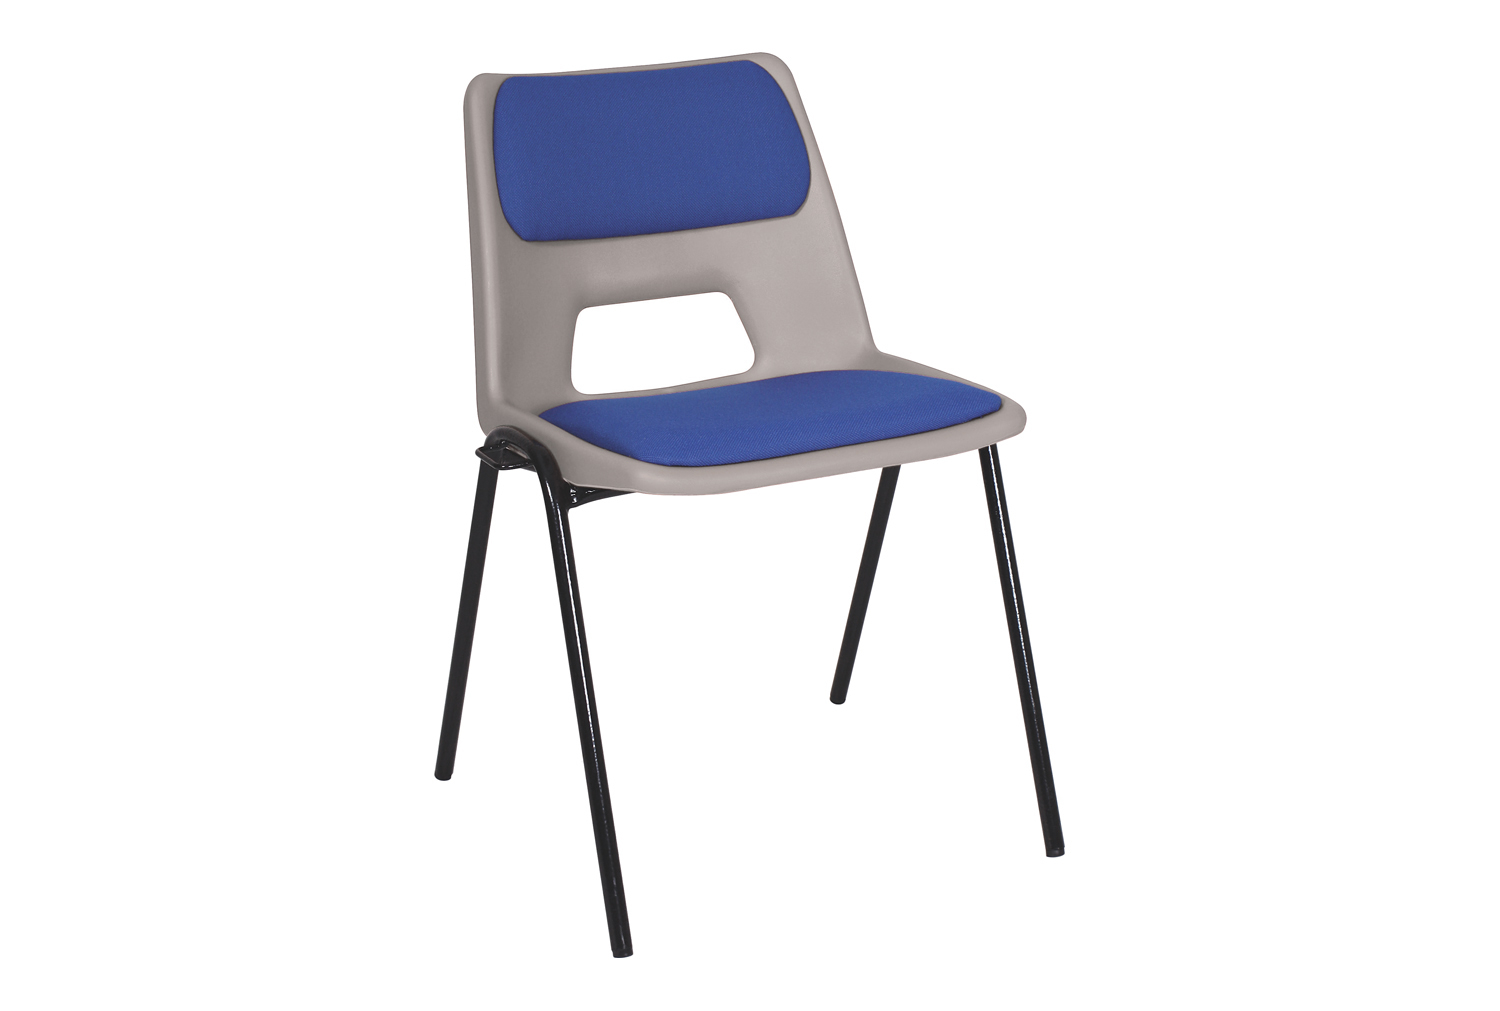 Qty 6 - Educate Poly Stacking Classroom Chairs With Seat & Back Pad, 14+ Years - 44wx37dx46h (cm), Light Grey Frame, Hi Blue